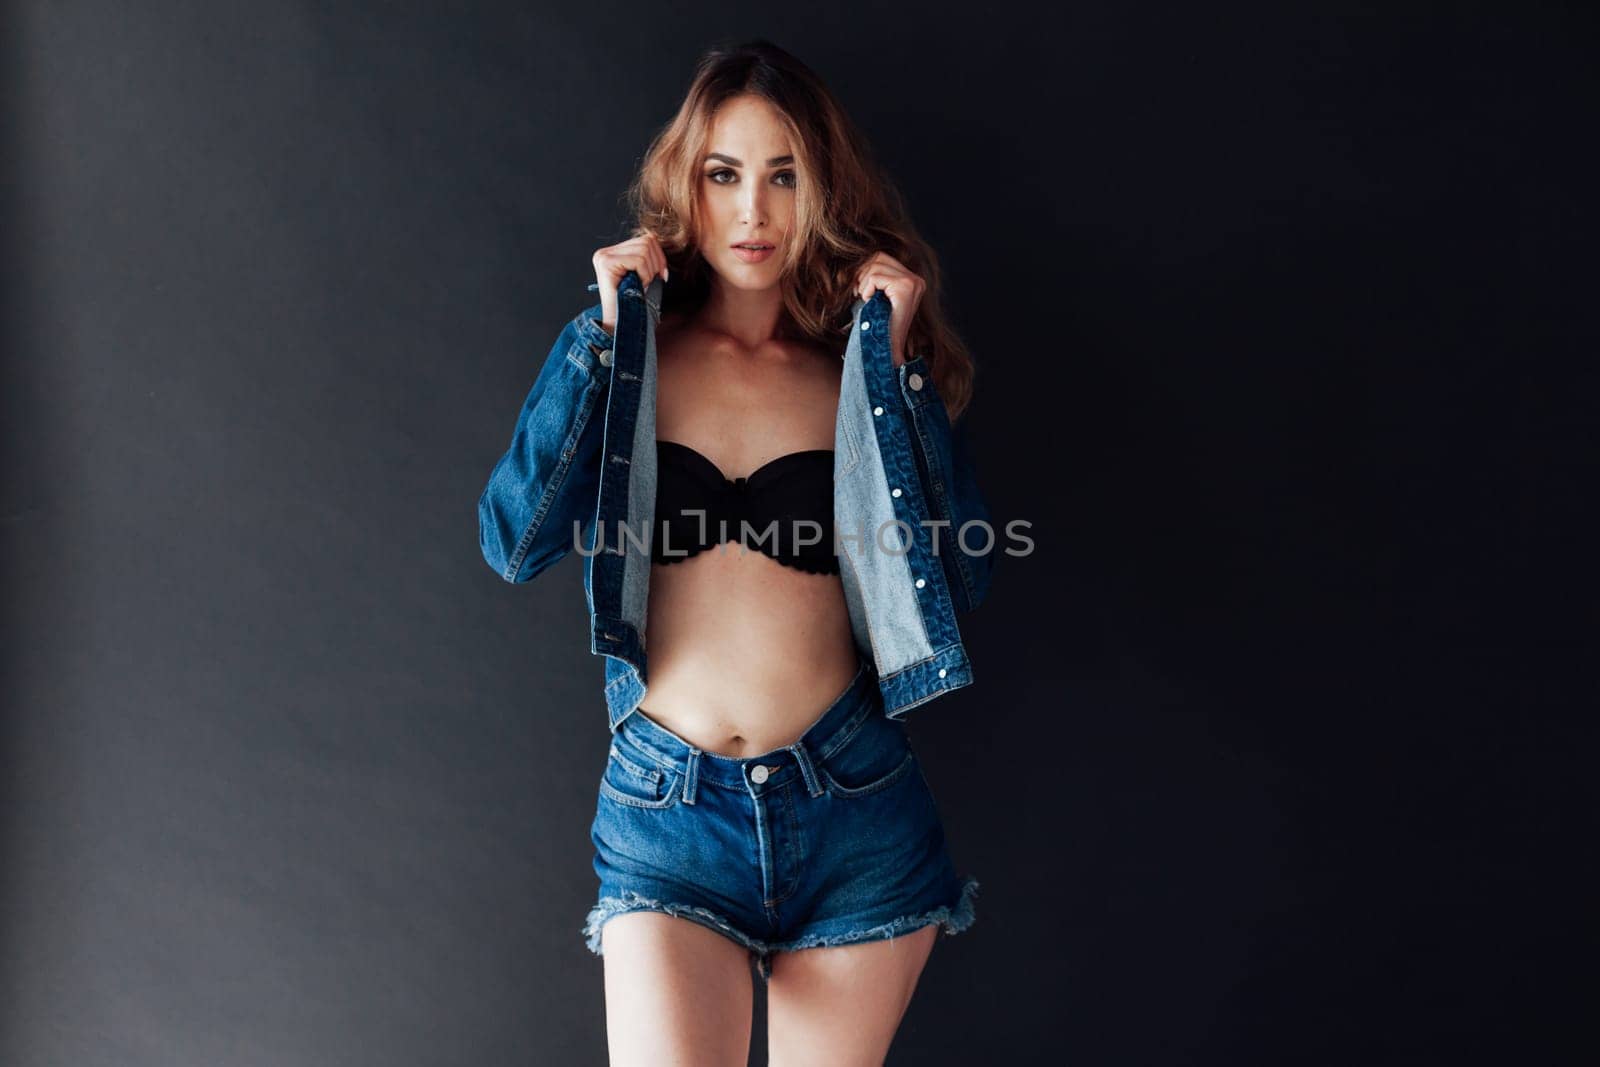 Portrait of a beautiful fashionable woman in lingerie and jeans by Simakov